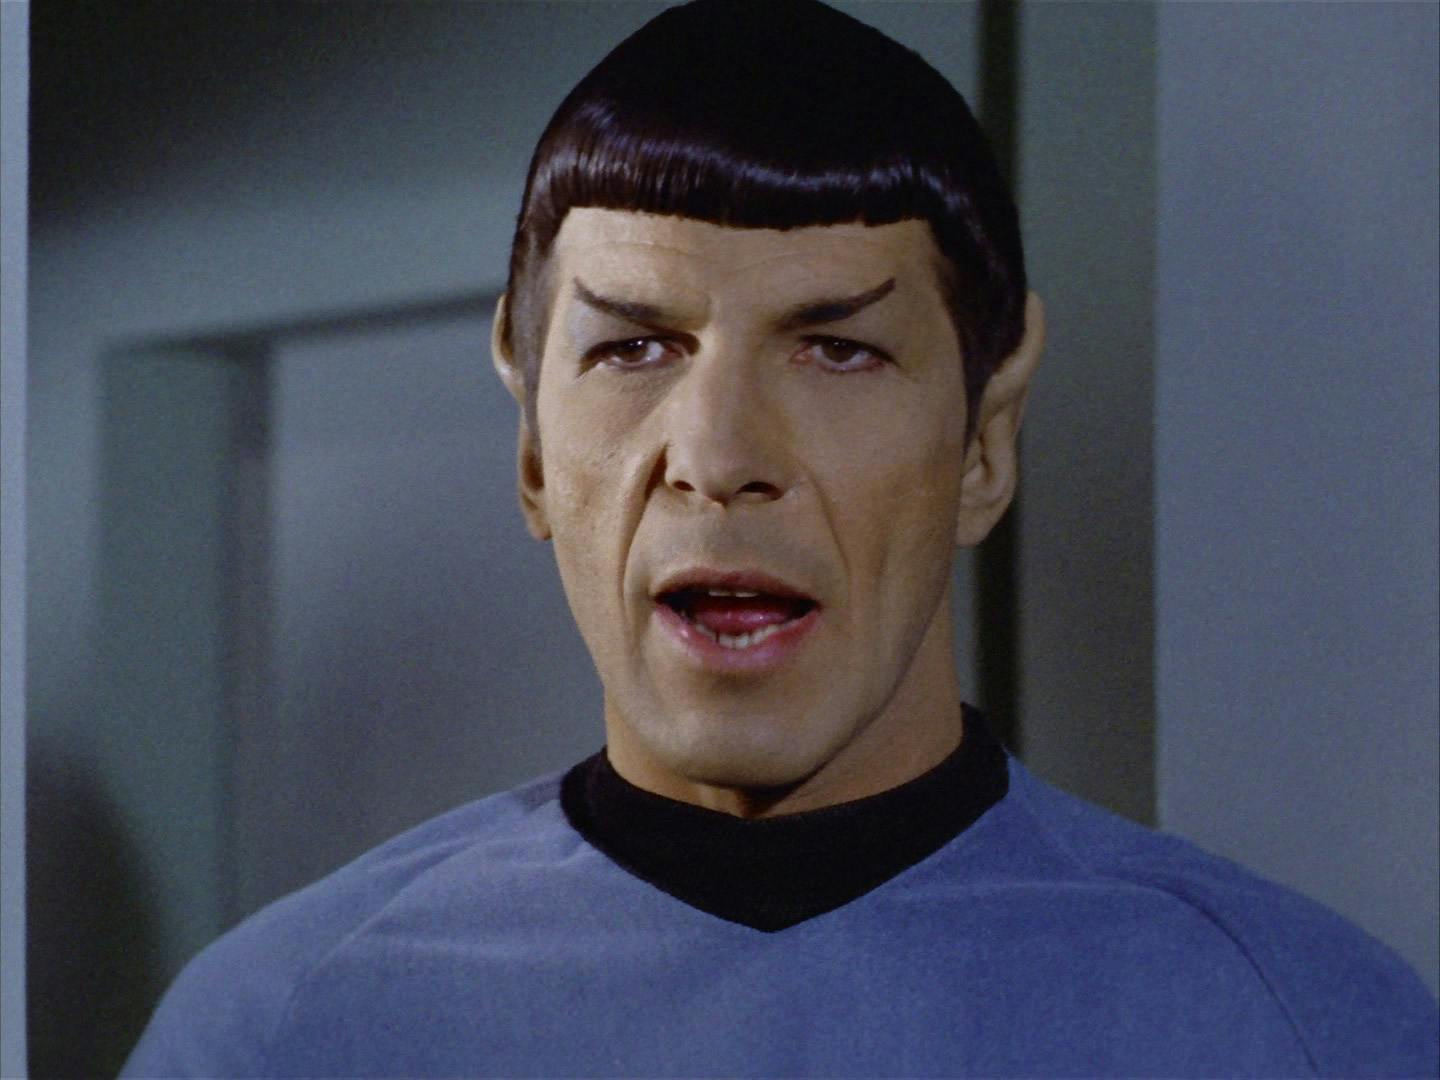 Outside of his quarters, Spock raises his voice cruelly at Nurse Chapel in 'Amok Time'